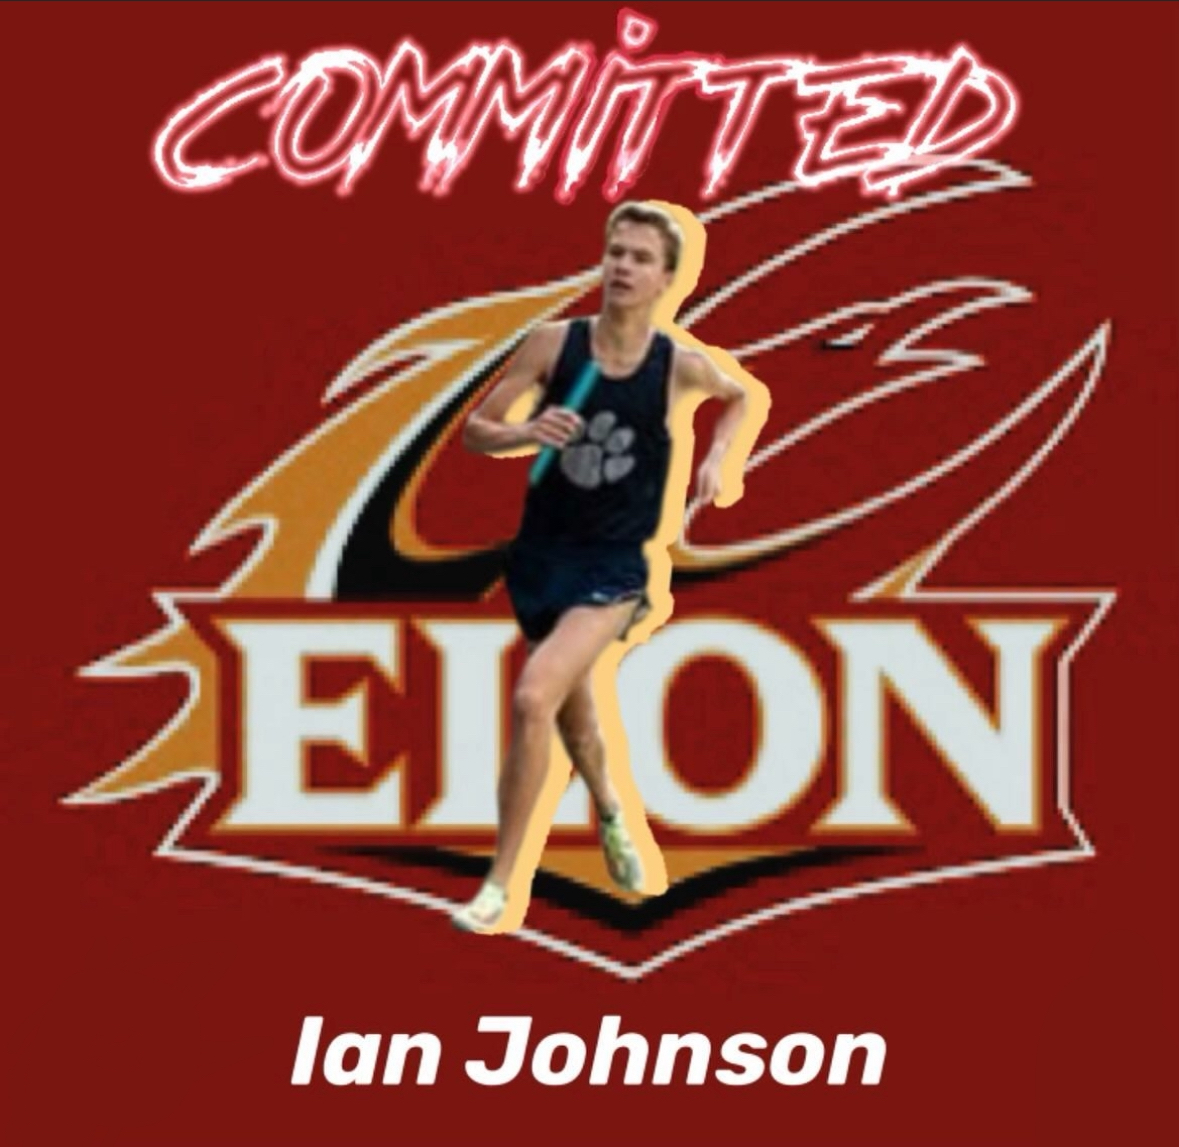 Ian Johnson uses kindness and perseverance to attack any struggle along his way. He used these skills to excel in both school and running to commit to Elon University for track and cross country. 